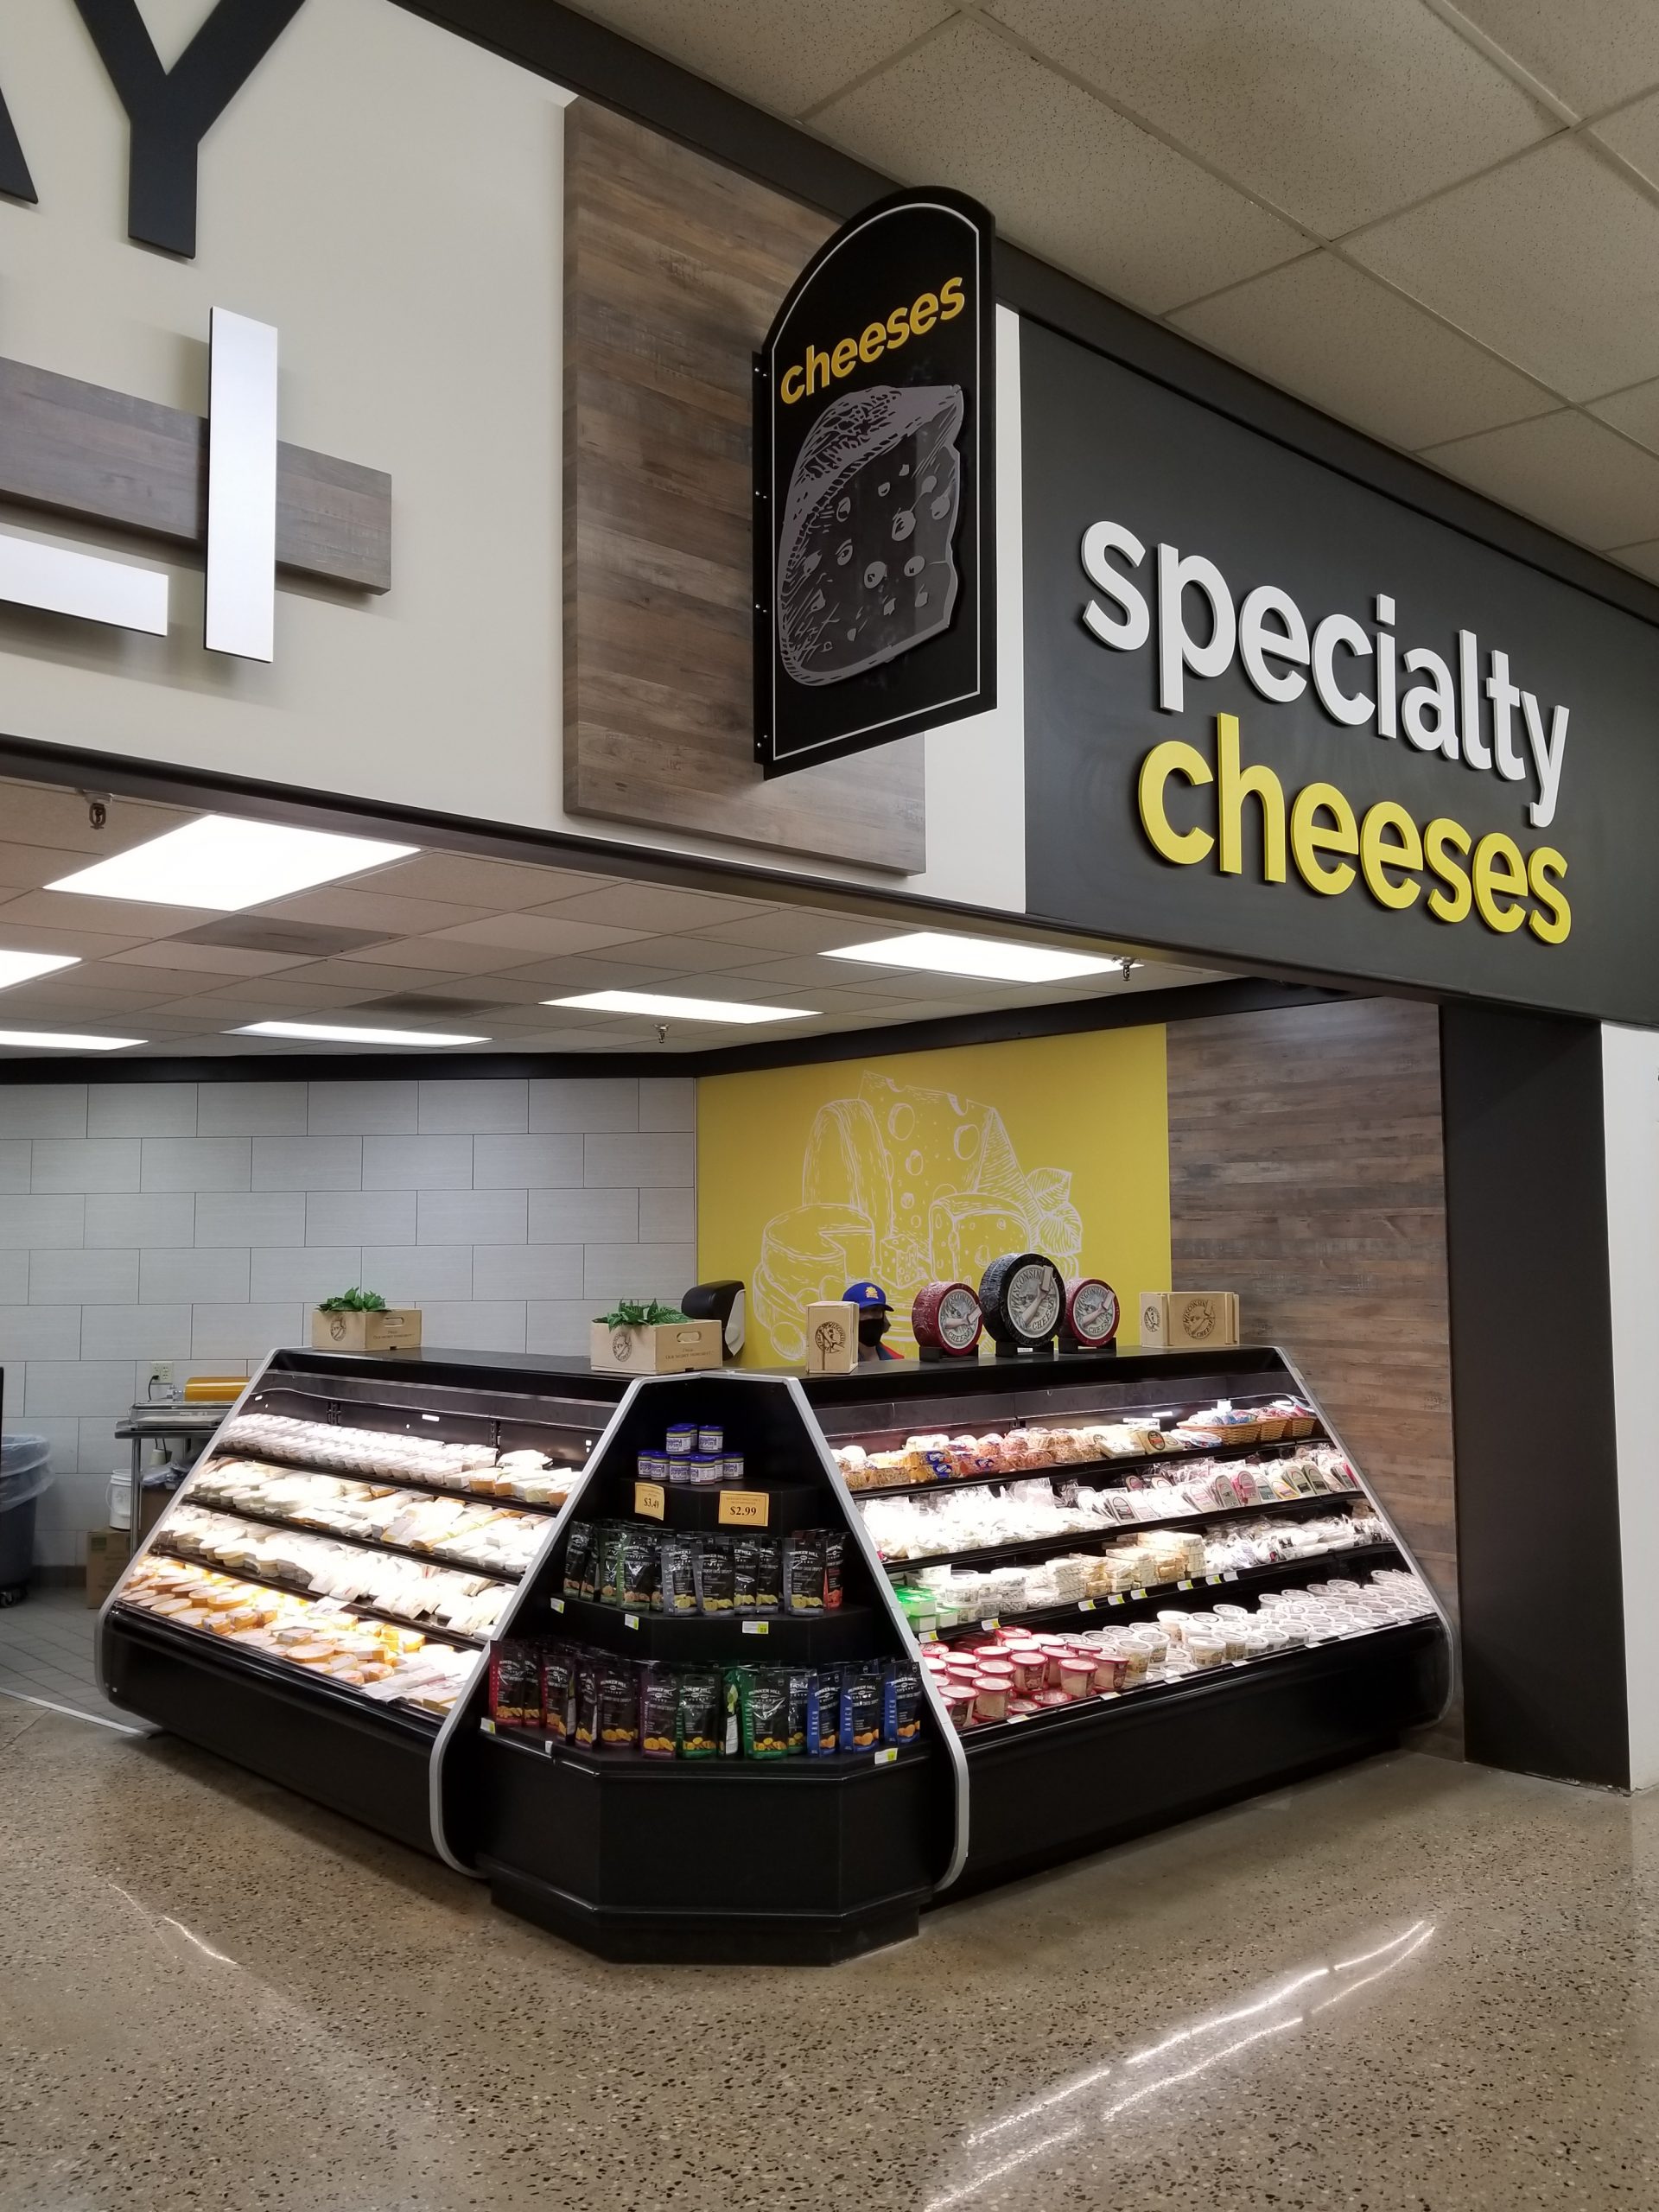 StoreMasters made sure the specialty sections were clearly identified to provide a upgraded customer experience